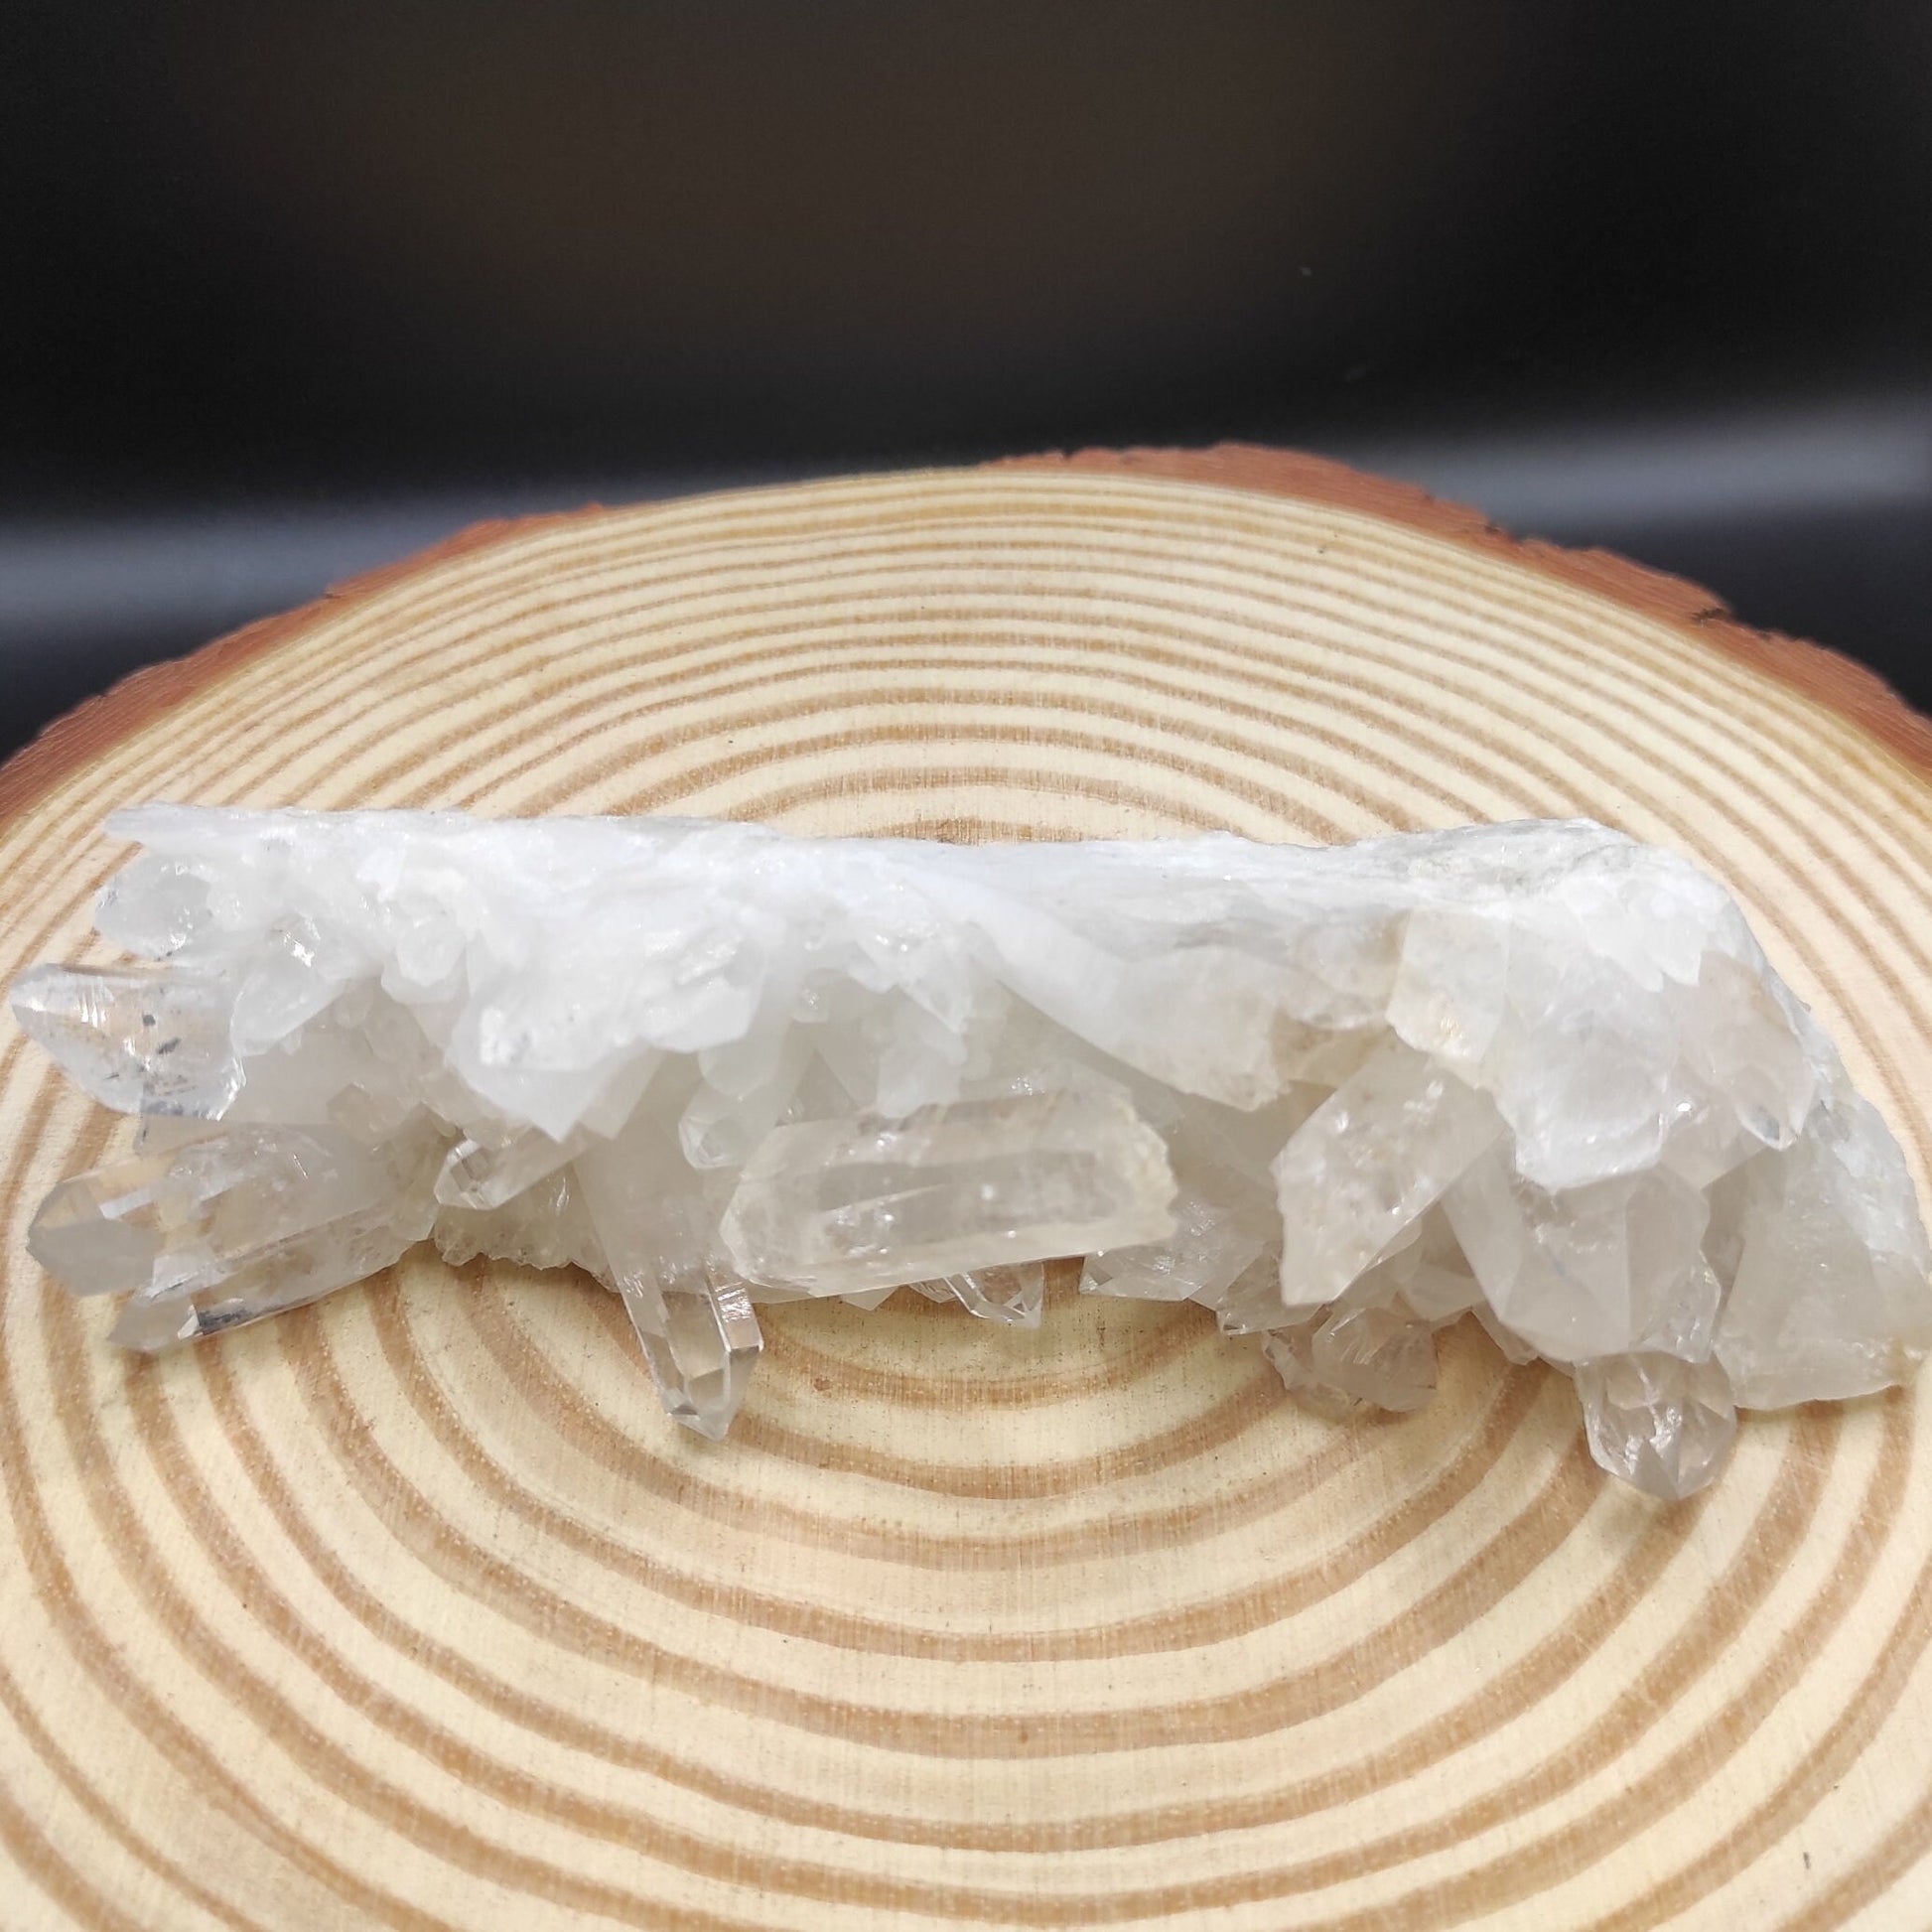 409g NATURAL Clear Quartz Crystal Cluster from Colombia Untreated Quartz Point Cluster Mineral Specimen White Quartz Crystal Clear Quartz